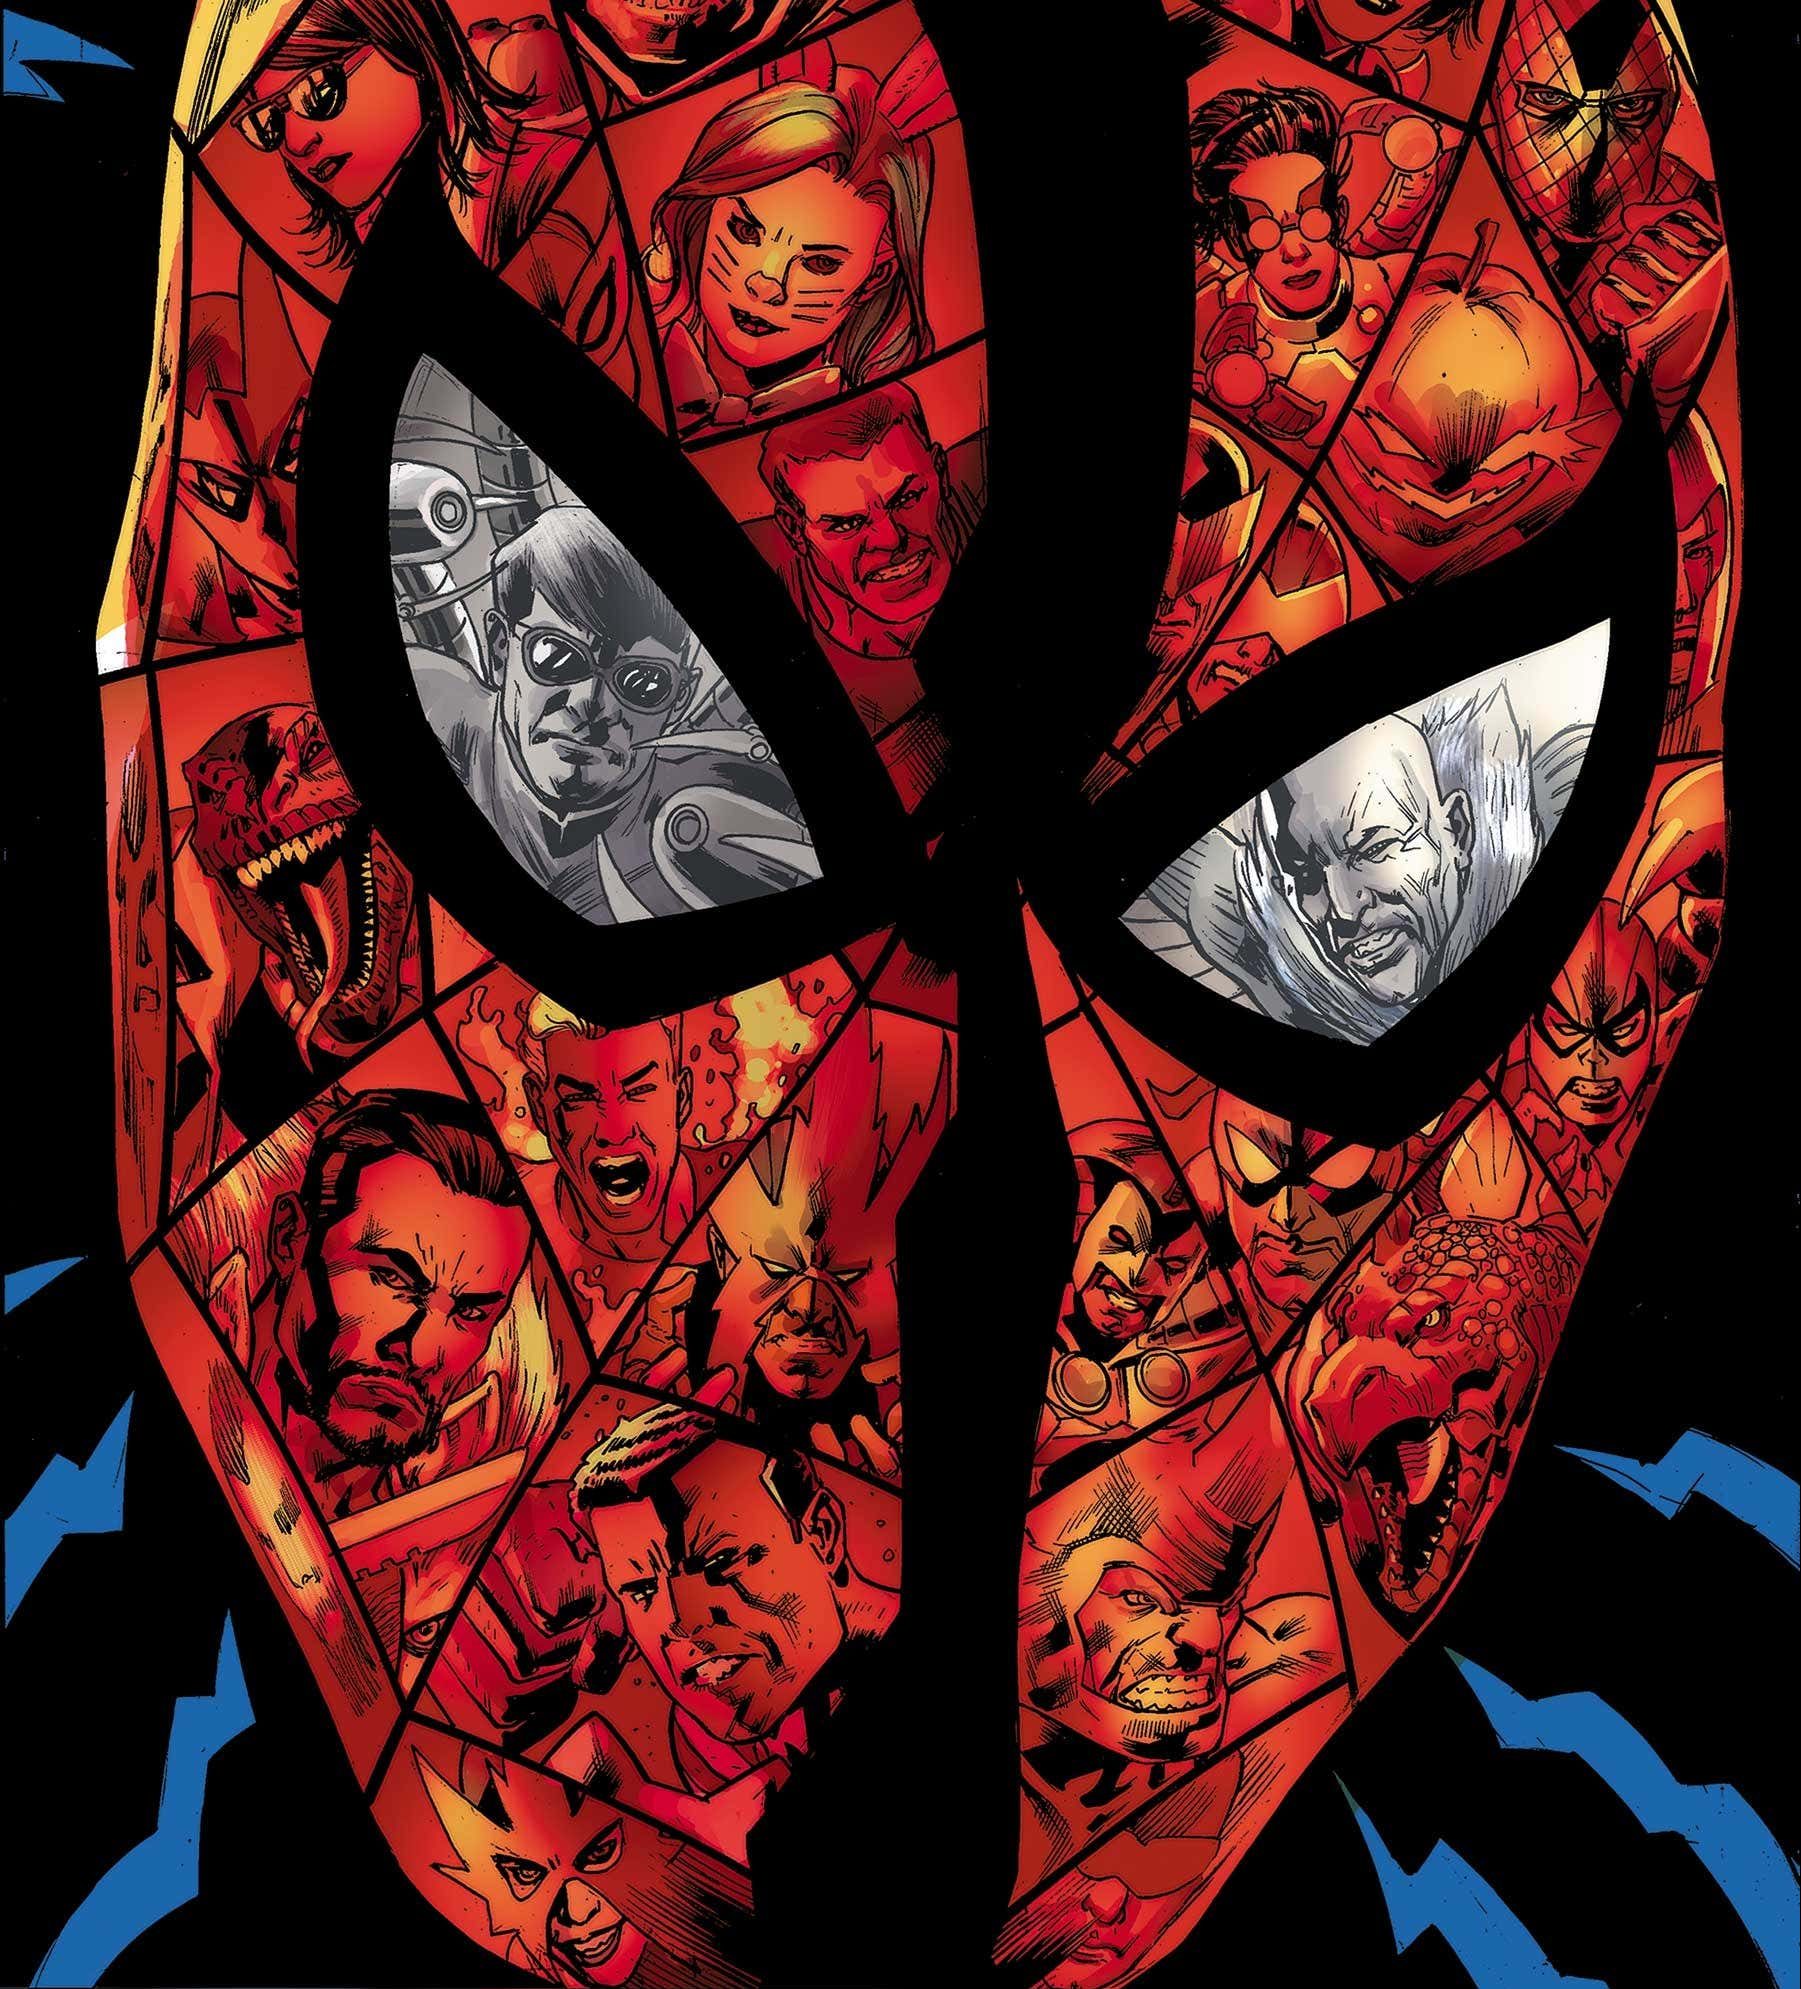 'Sinister War' #1 sees Spidey outnumbered, but not outclassed